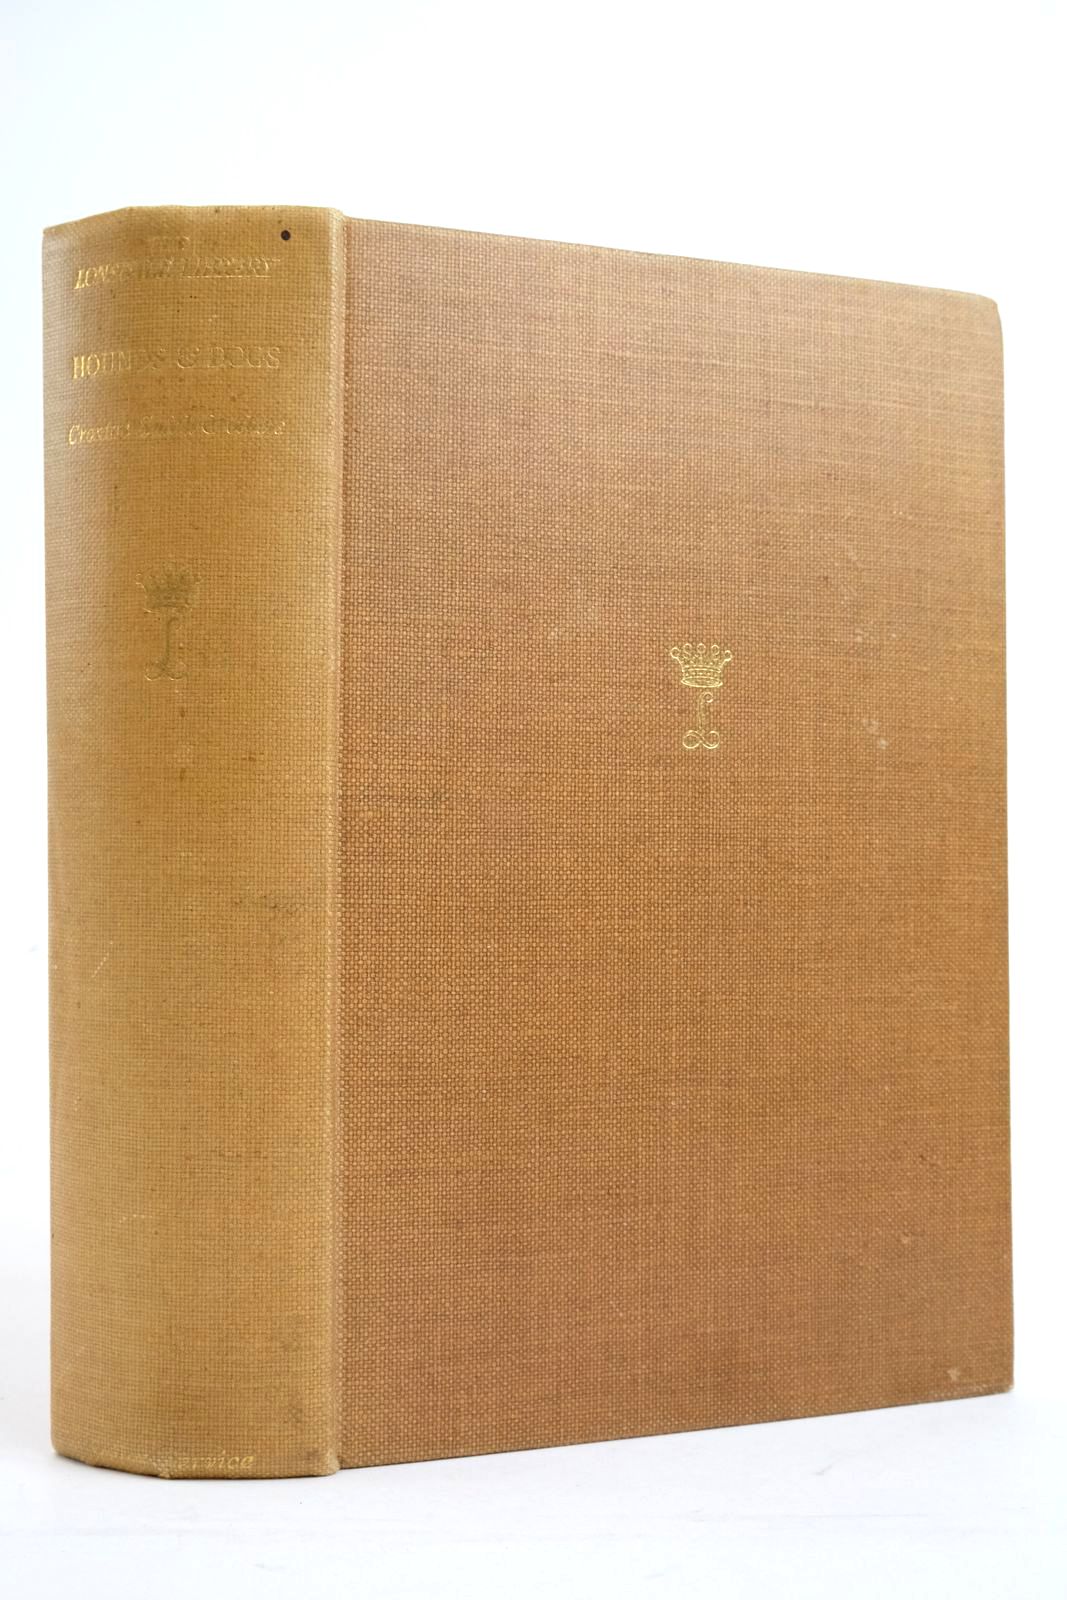 Photo of HOUNDS & DOGS written by Smith, A. Croxton published by Seeley, Service & Co. Ltd. (STOCK CODE: 2136011)  for sale by Stella & Rose's Books